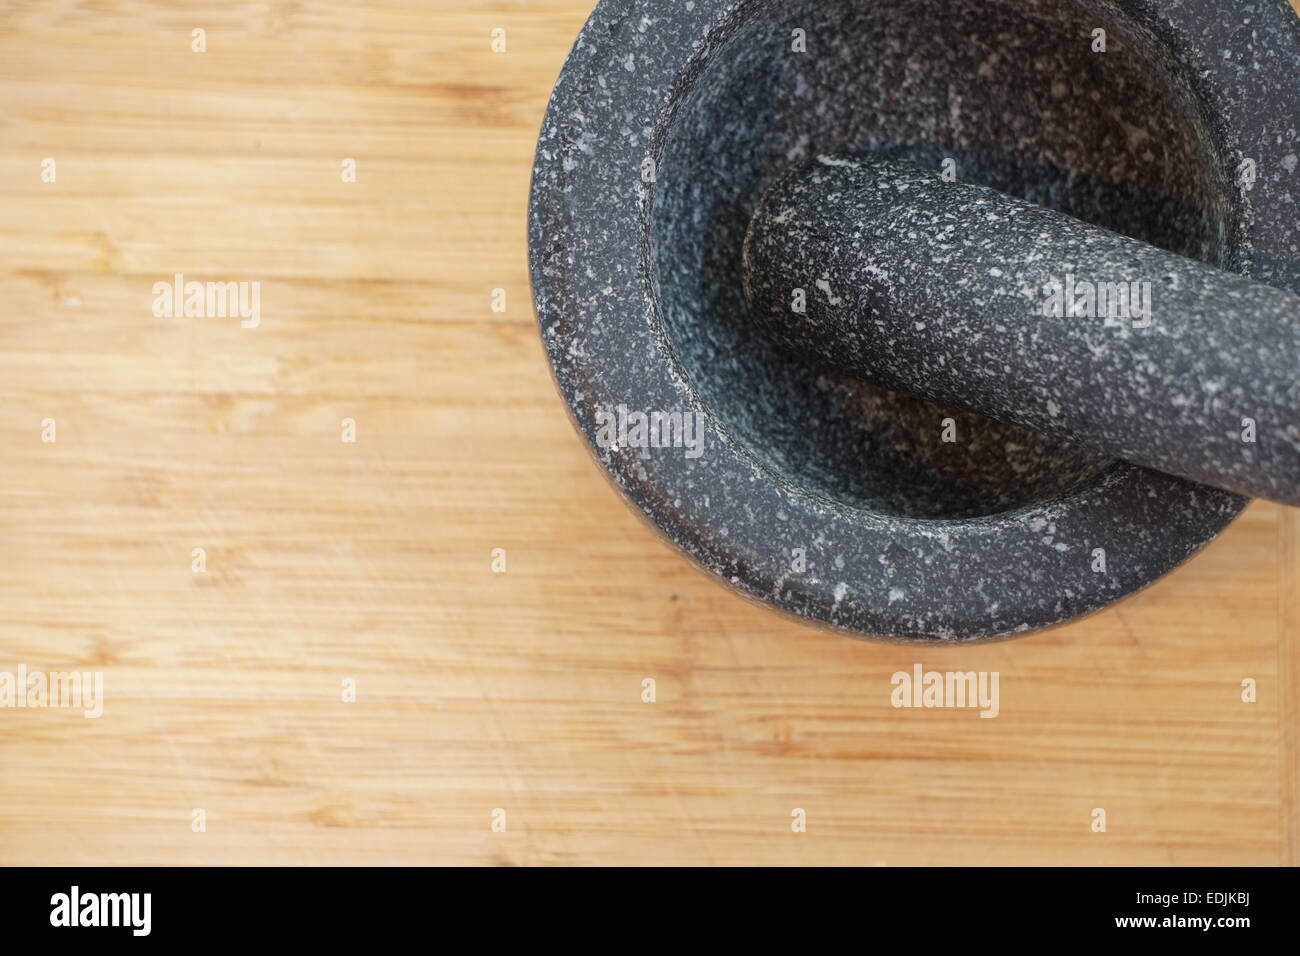 Mortar and pestle on wooden chopping board. Stock Photo